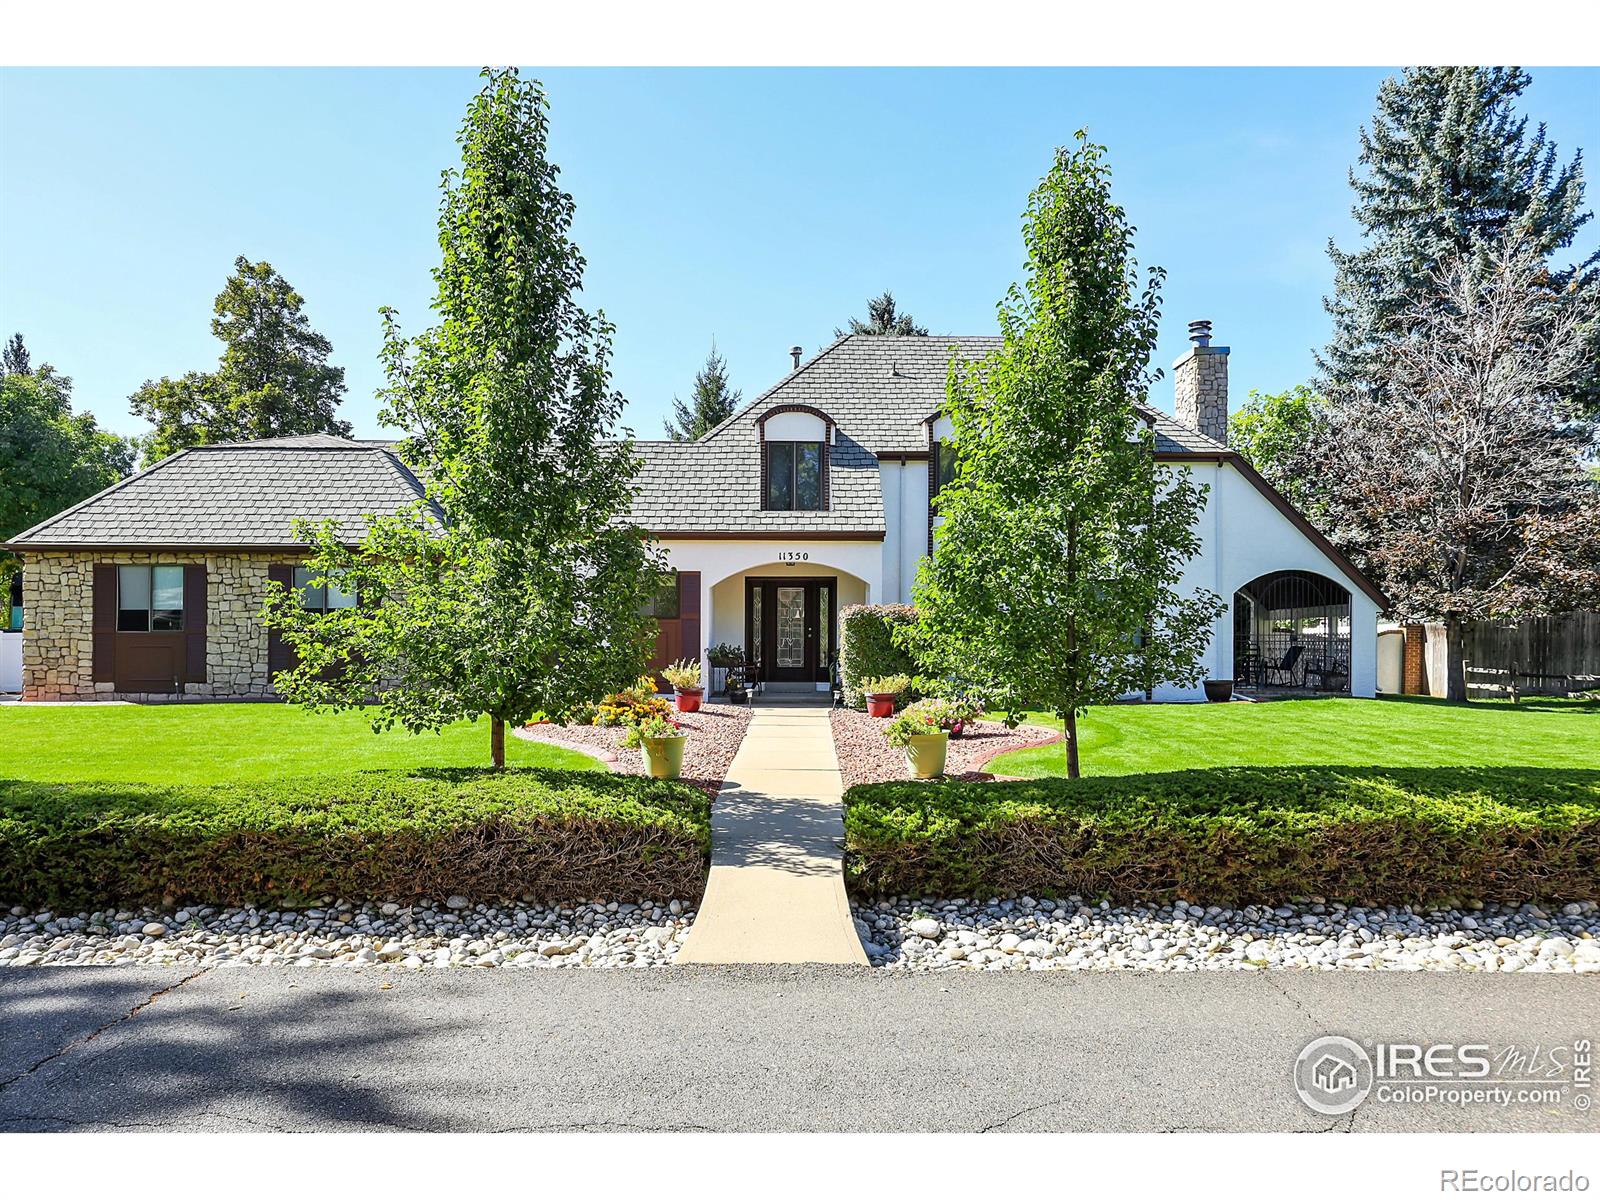 11350 W 78th Drive, arvada MLS: 456789997348 Beds: 3 Baths: 3 Price: $830,000